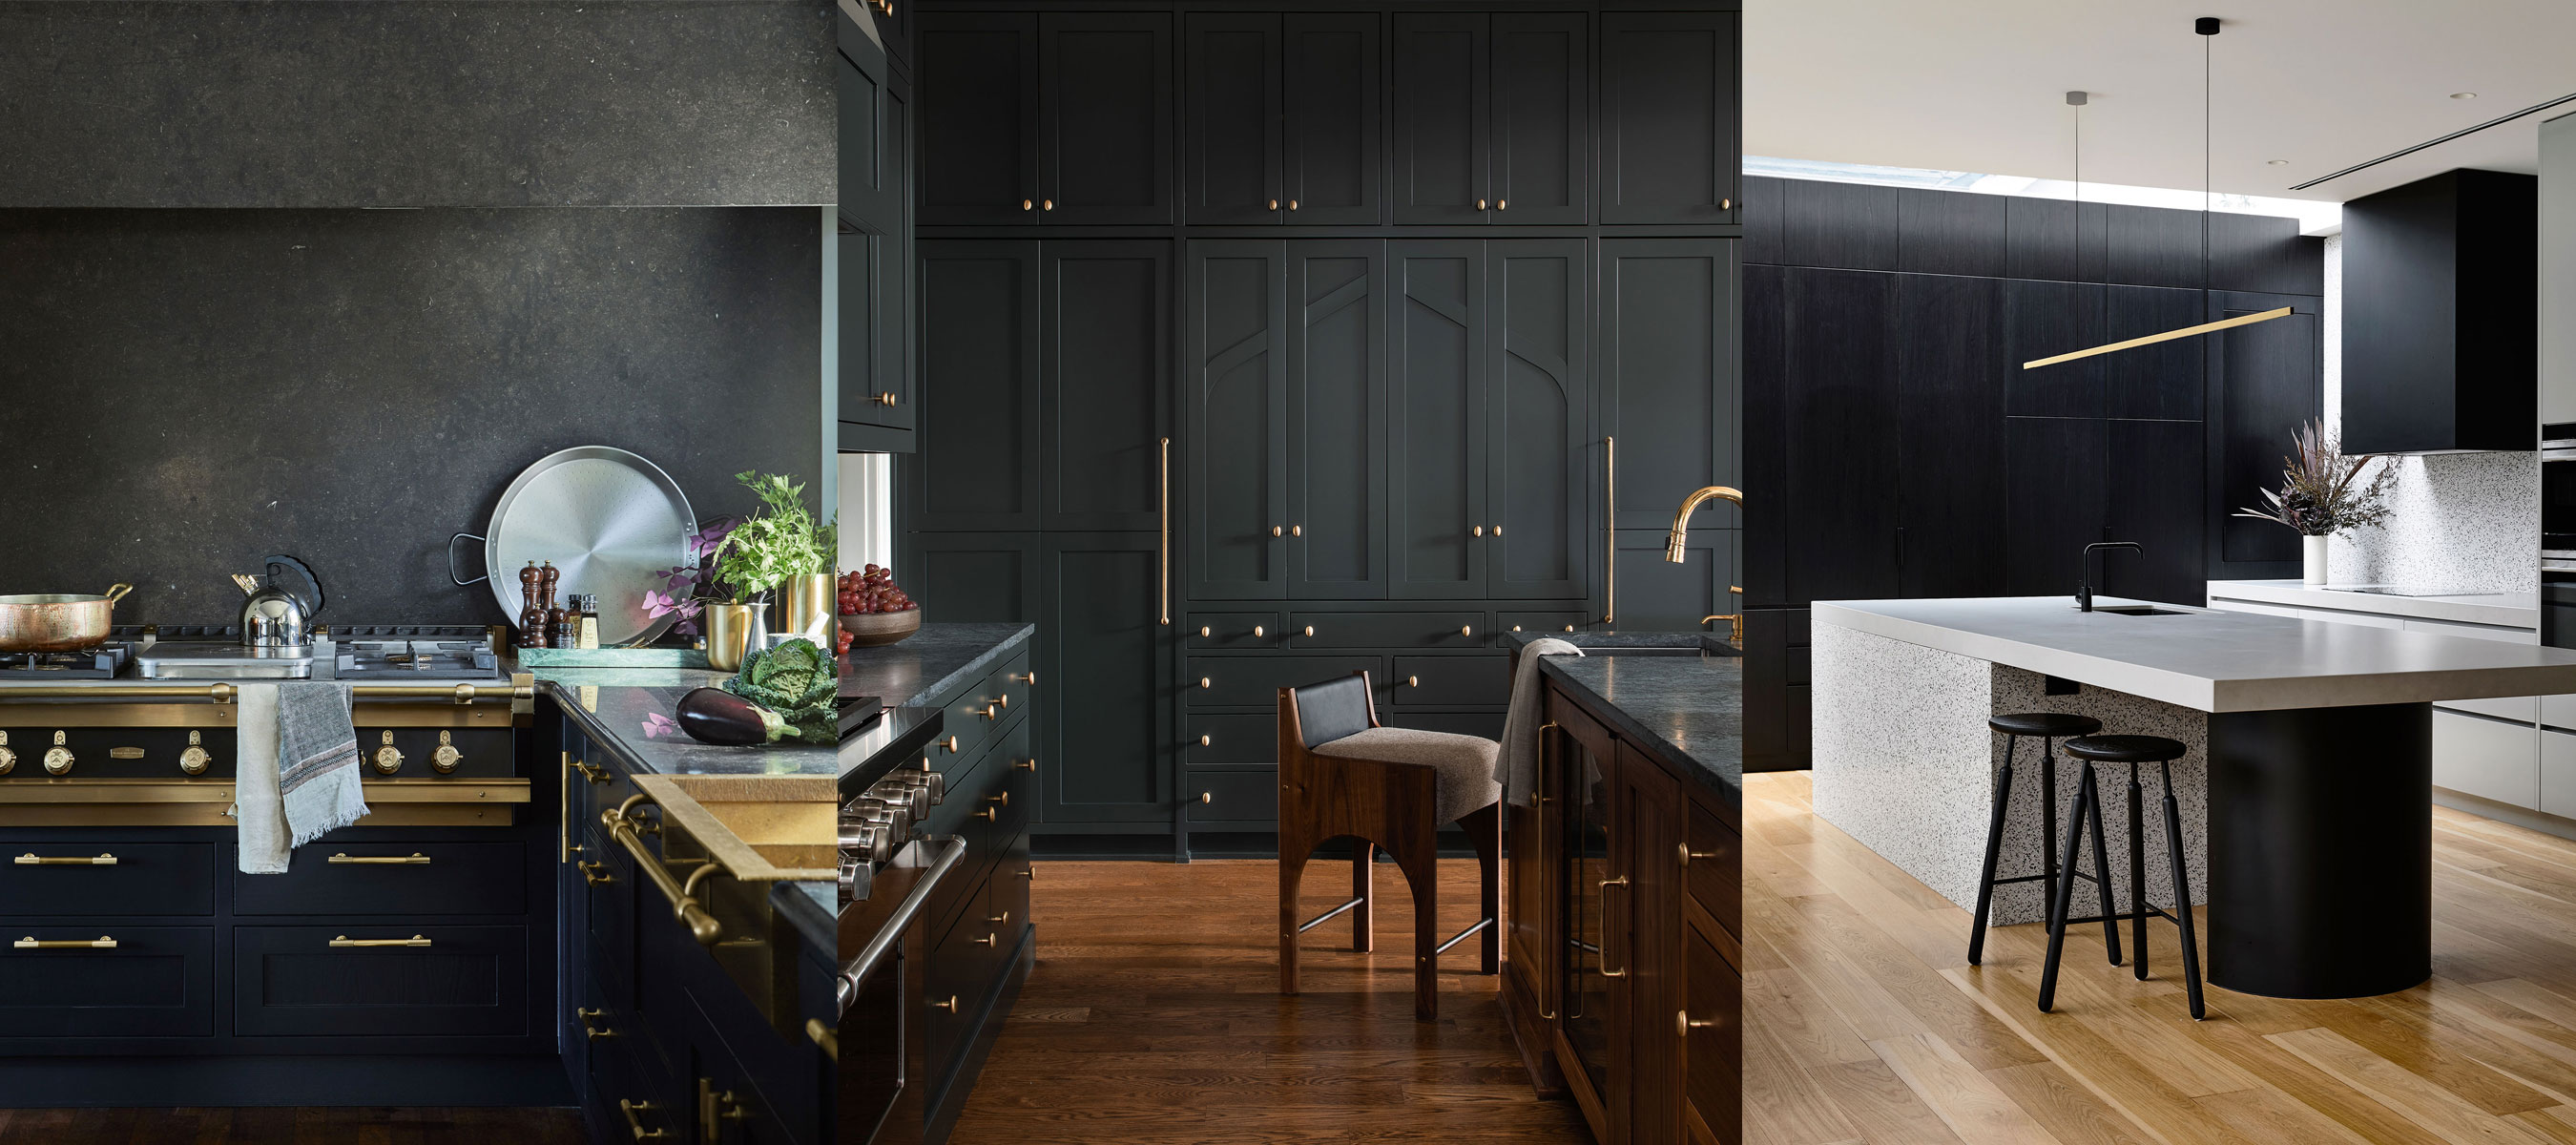 Black kitchen ideas: 14 tips for dramatic, beautiful spaces